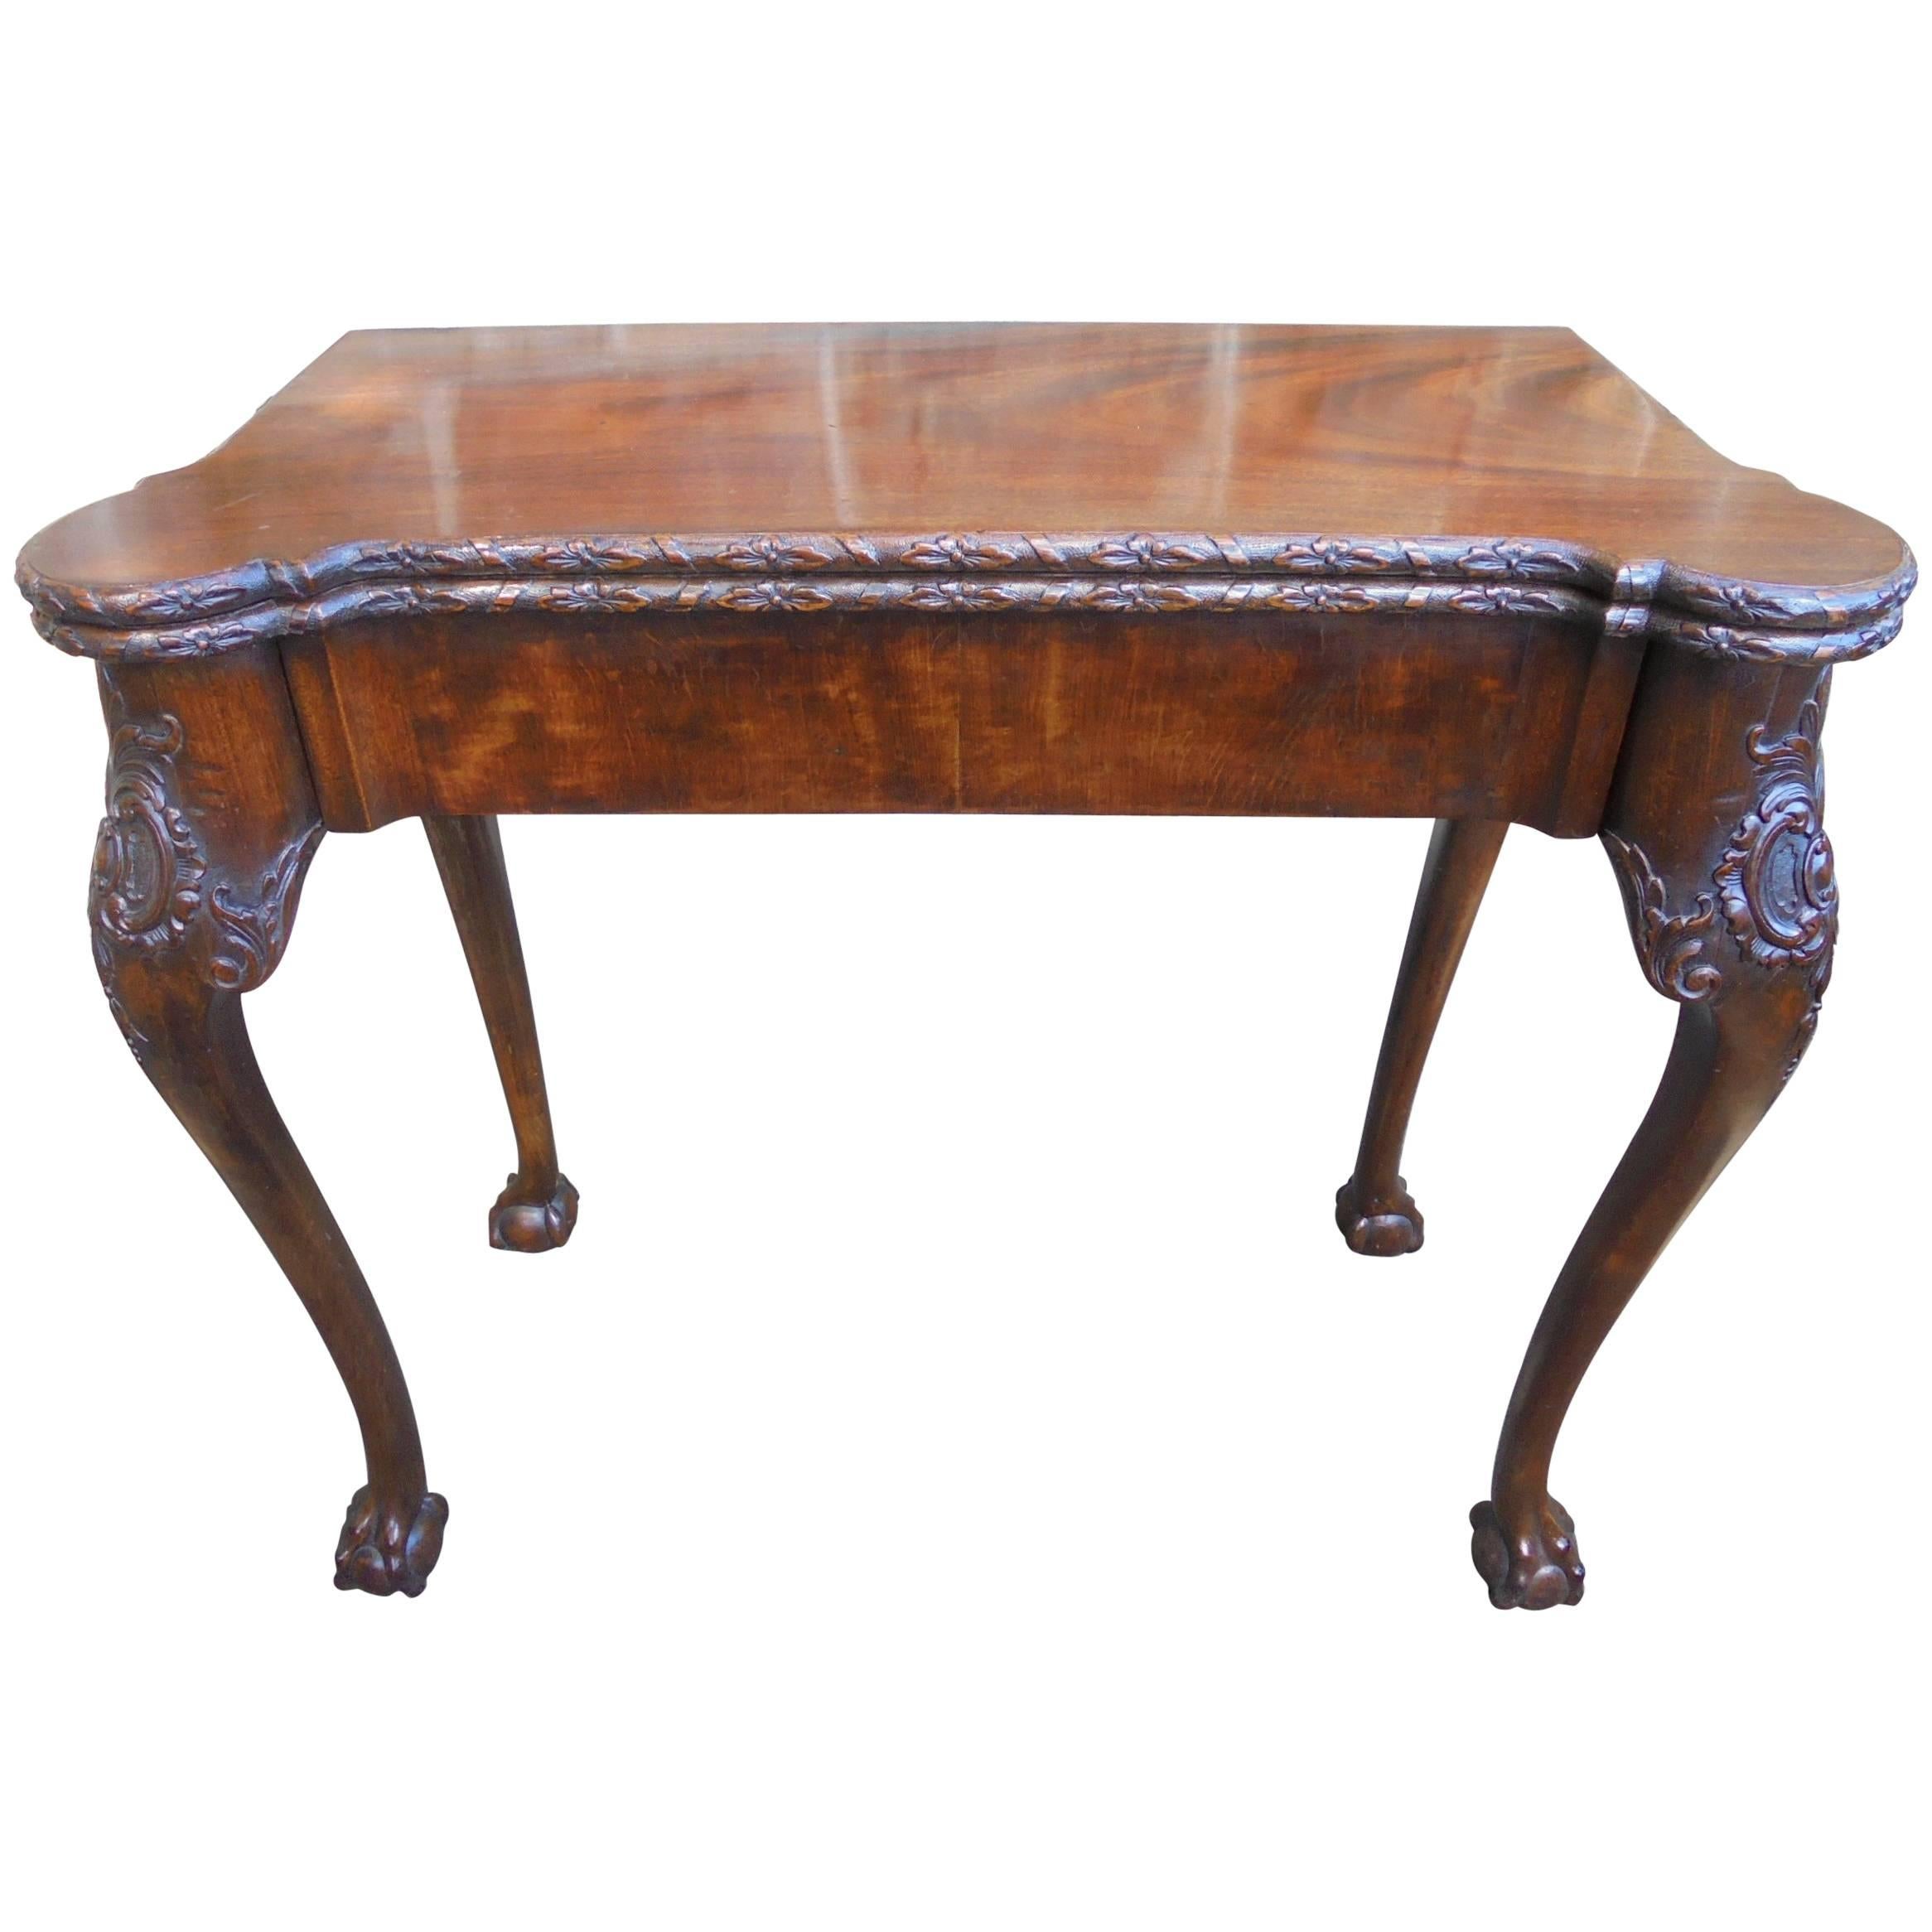 Fine Quality Antique Mahogany Fold over Games Table For Sale